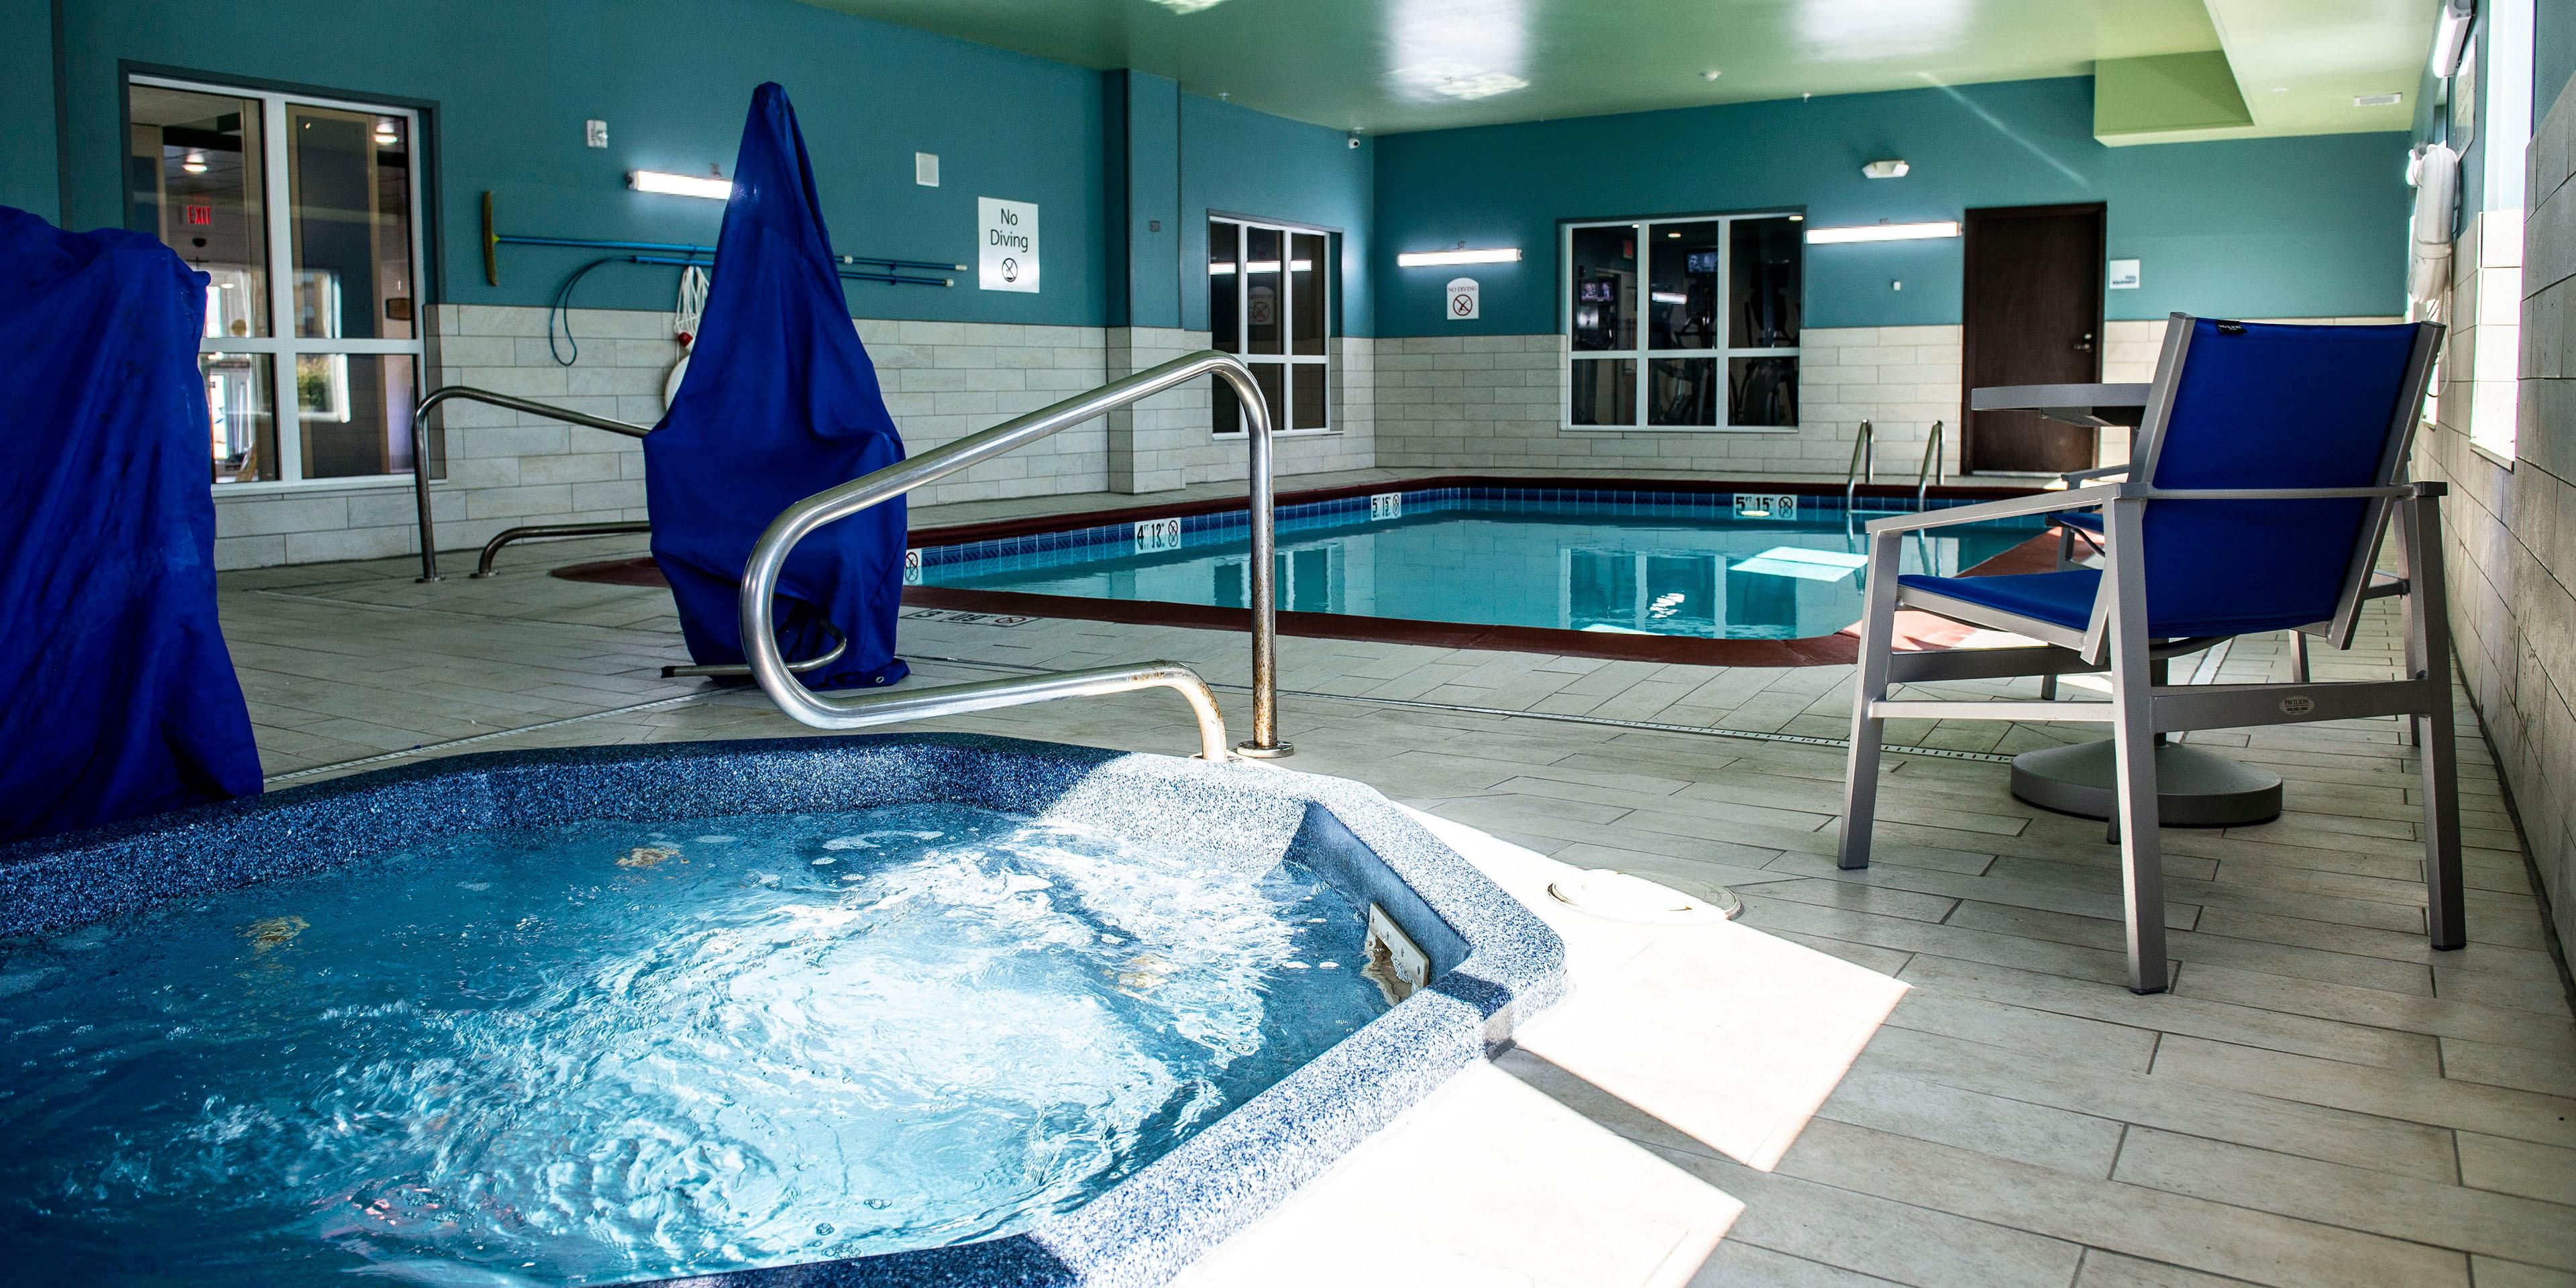 Come and enjoy our heated pool and jetted hot tub 